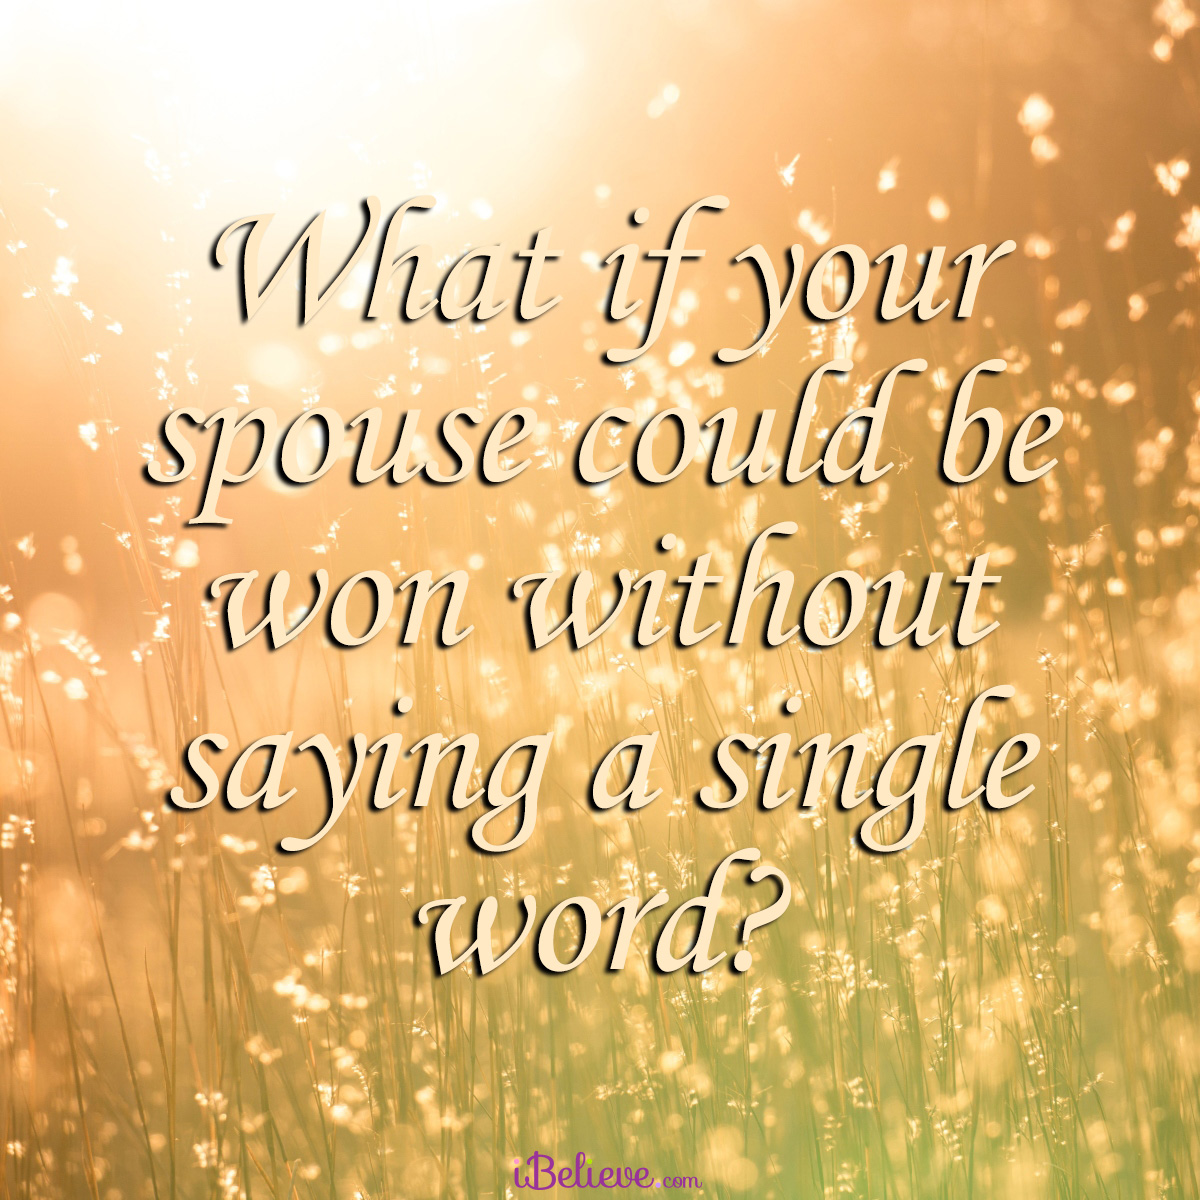 win over spouse, inspirational image